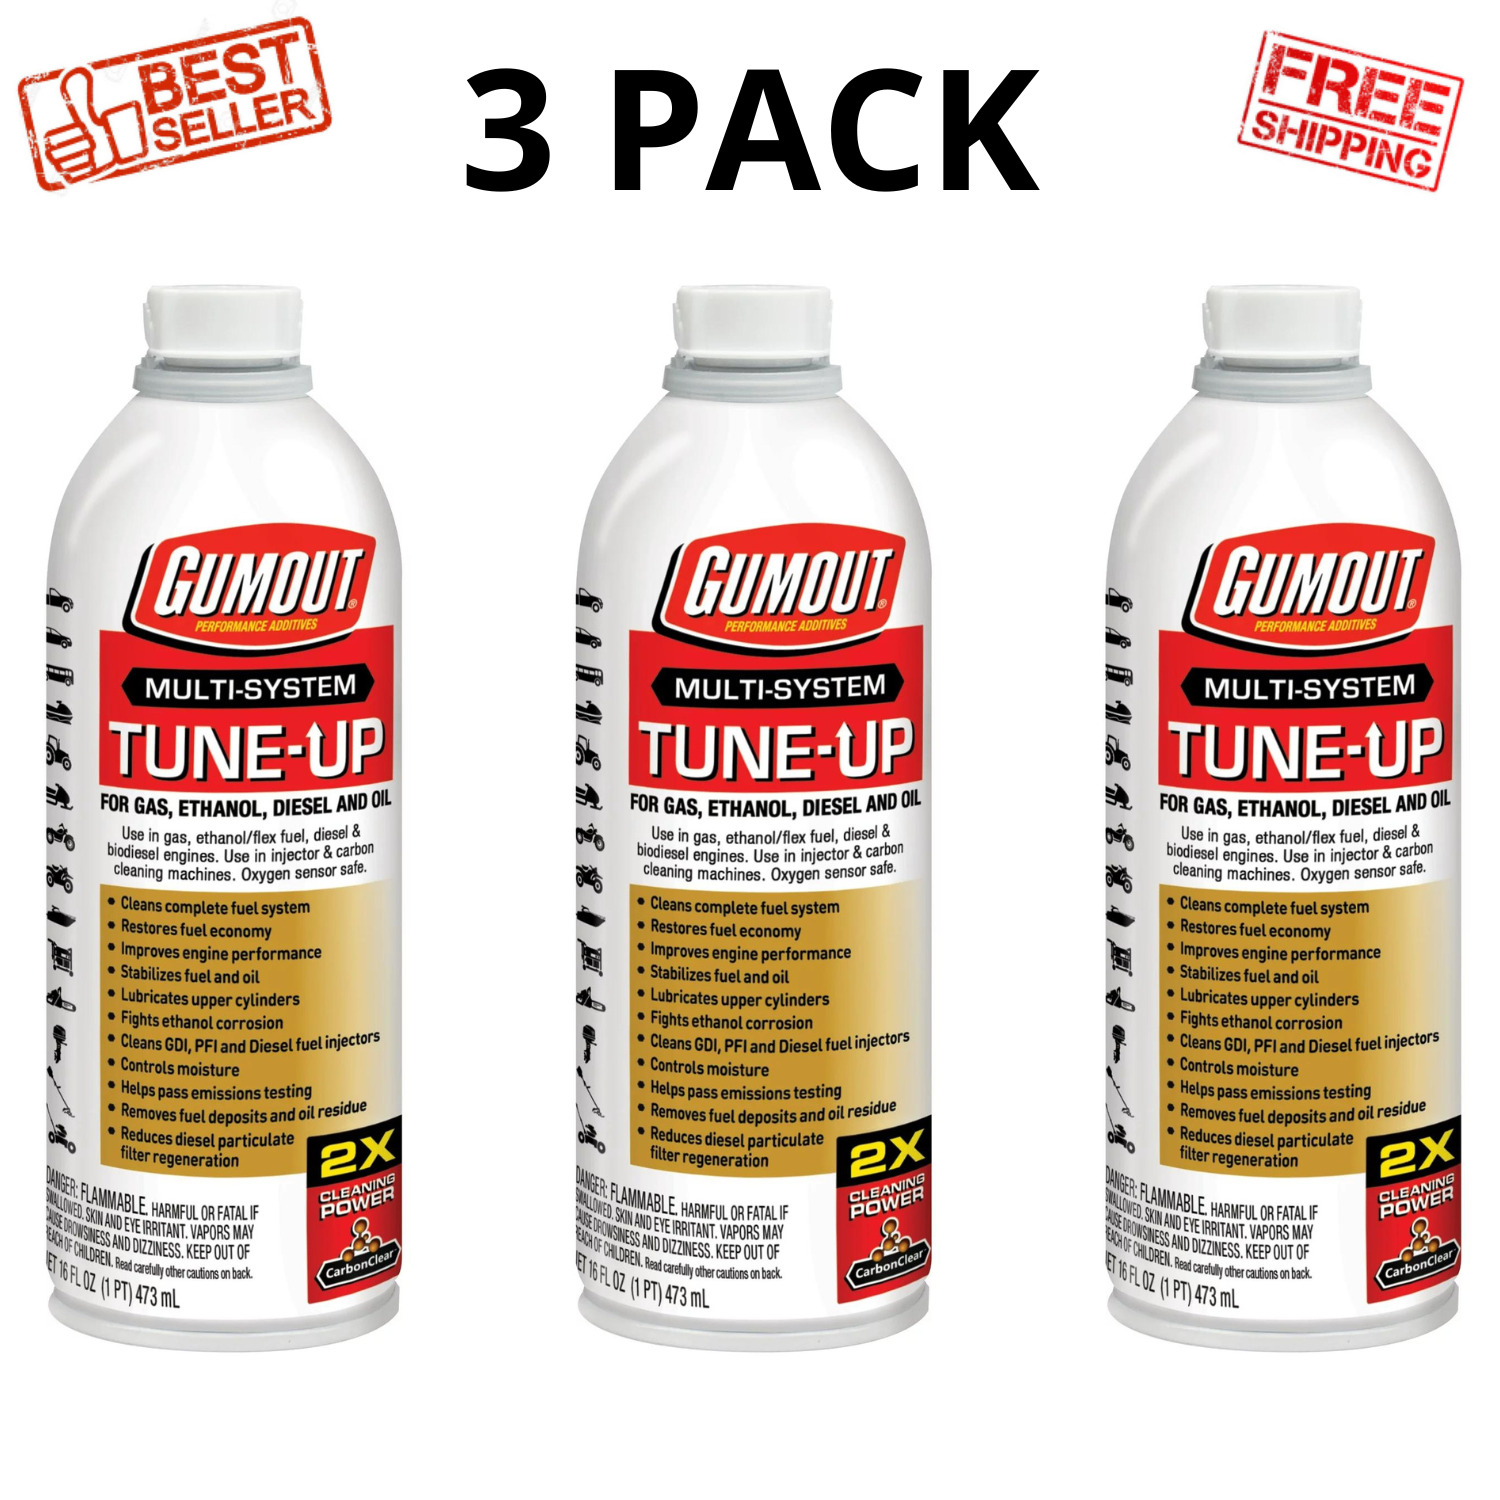 Gumout Multi-System Tune-Up For Gas, Ethanol, Diesel and Oil - 16 oz Bottle, 3PK